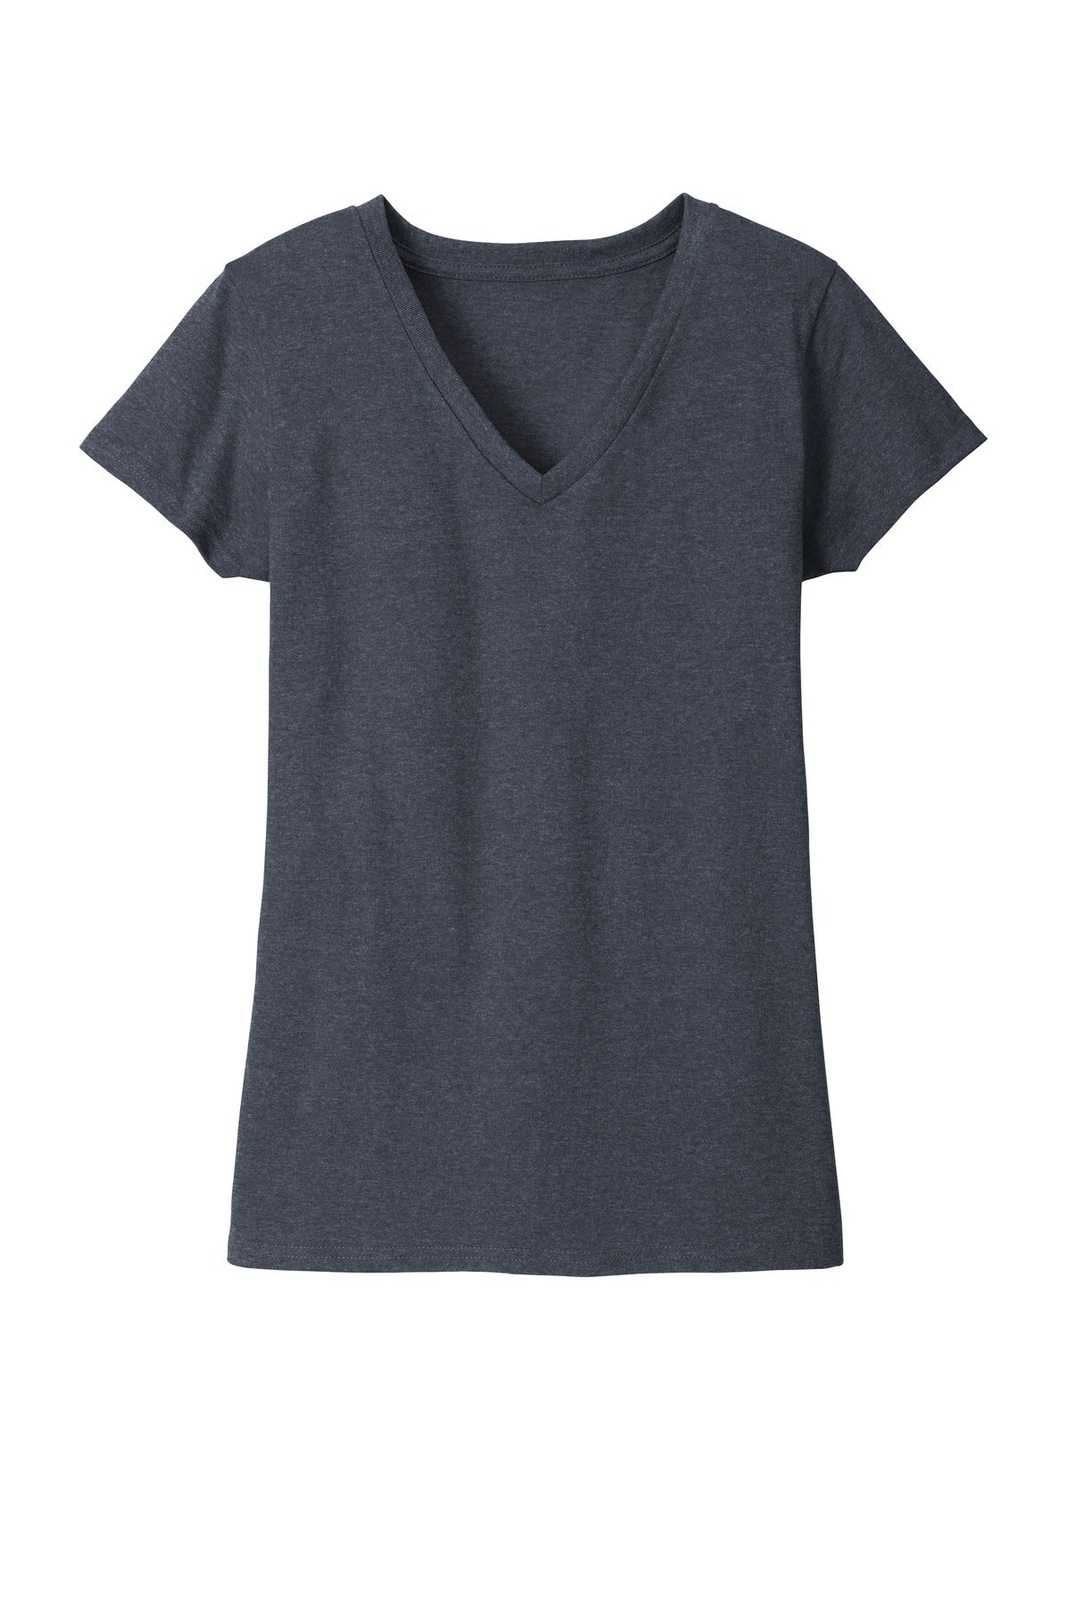 District DT8001 Womens Re-Tee V-Neck - Heathered Navy - HIT a Double - 5